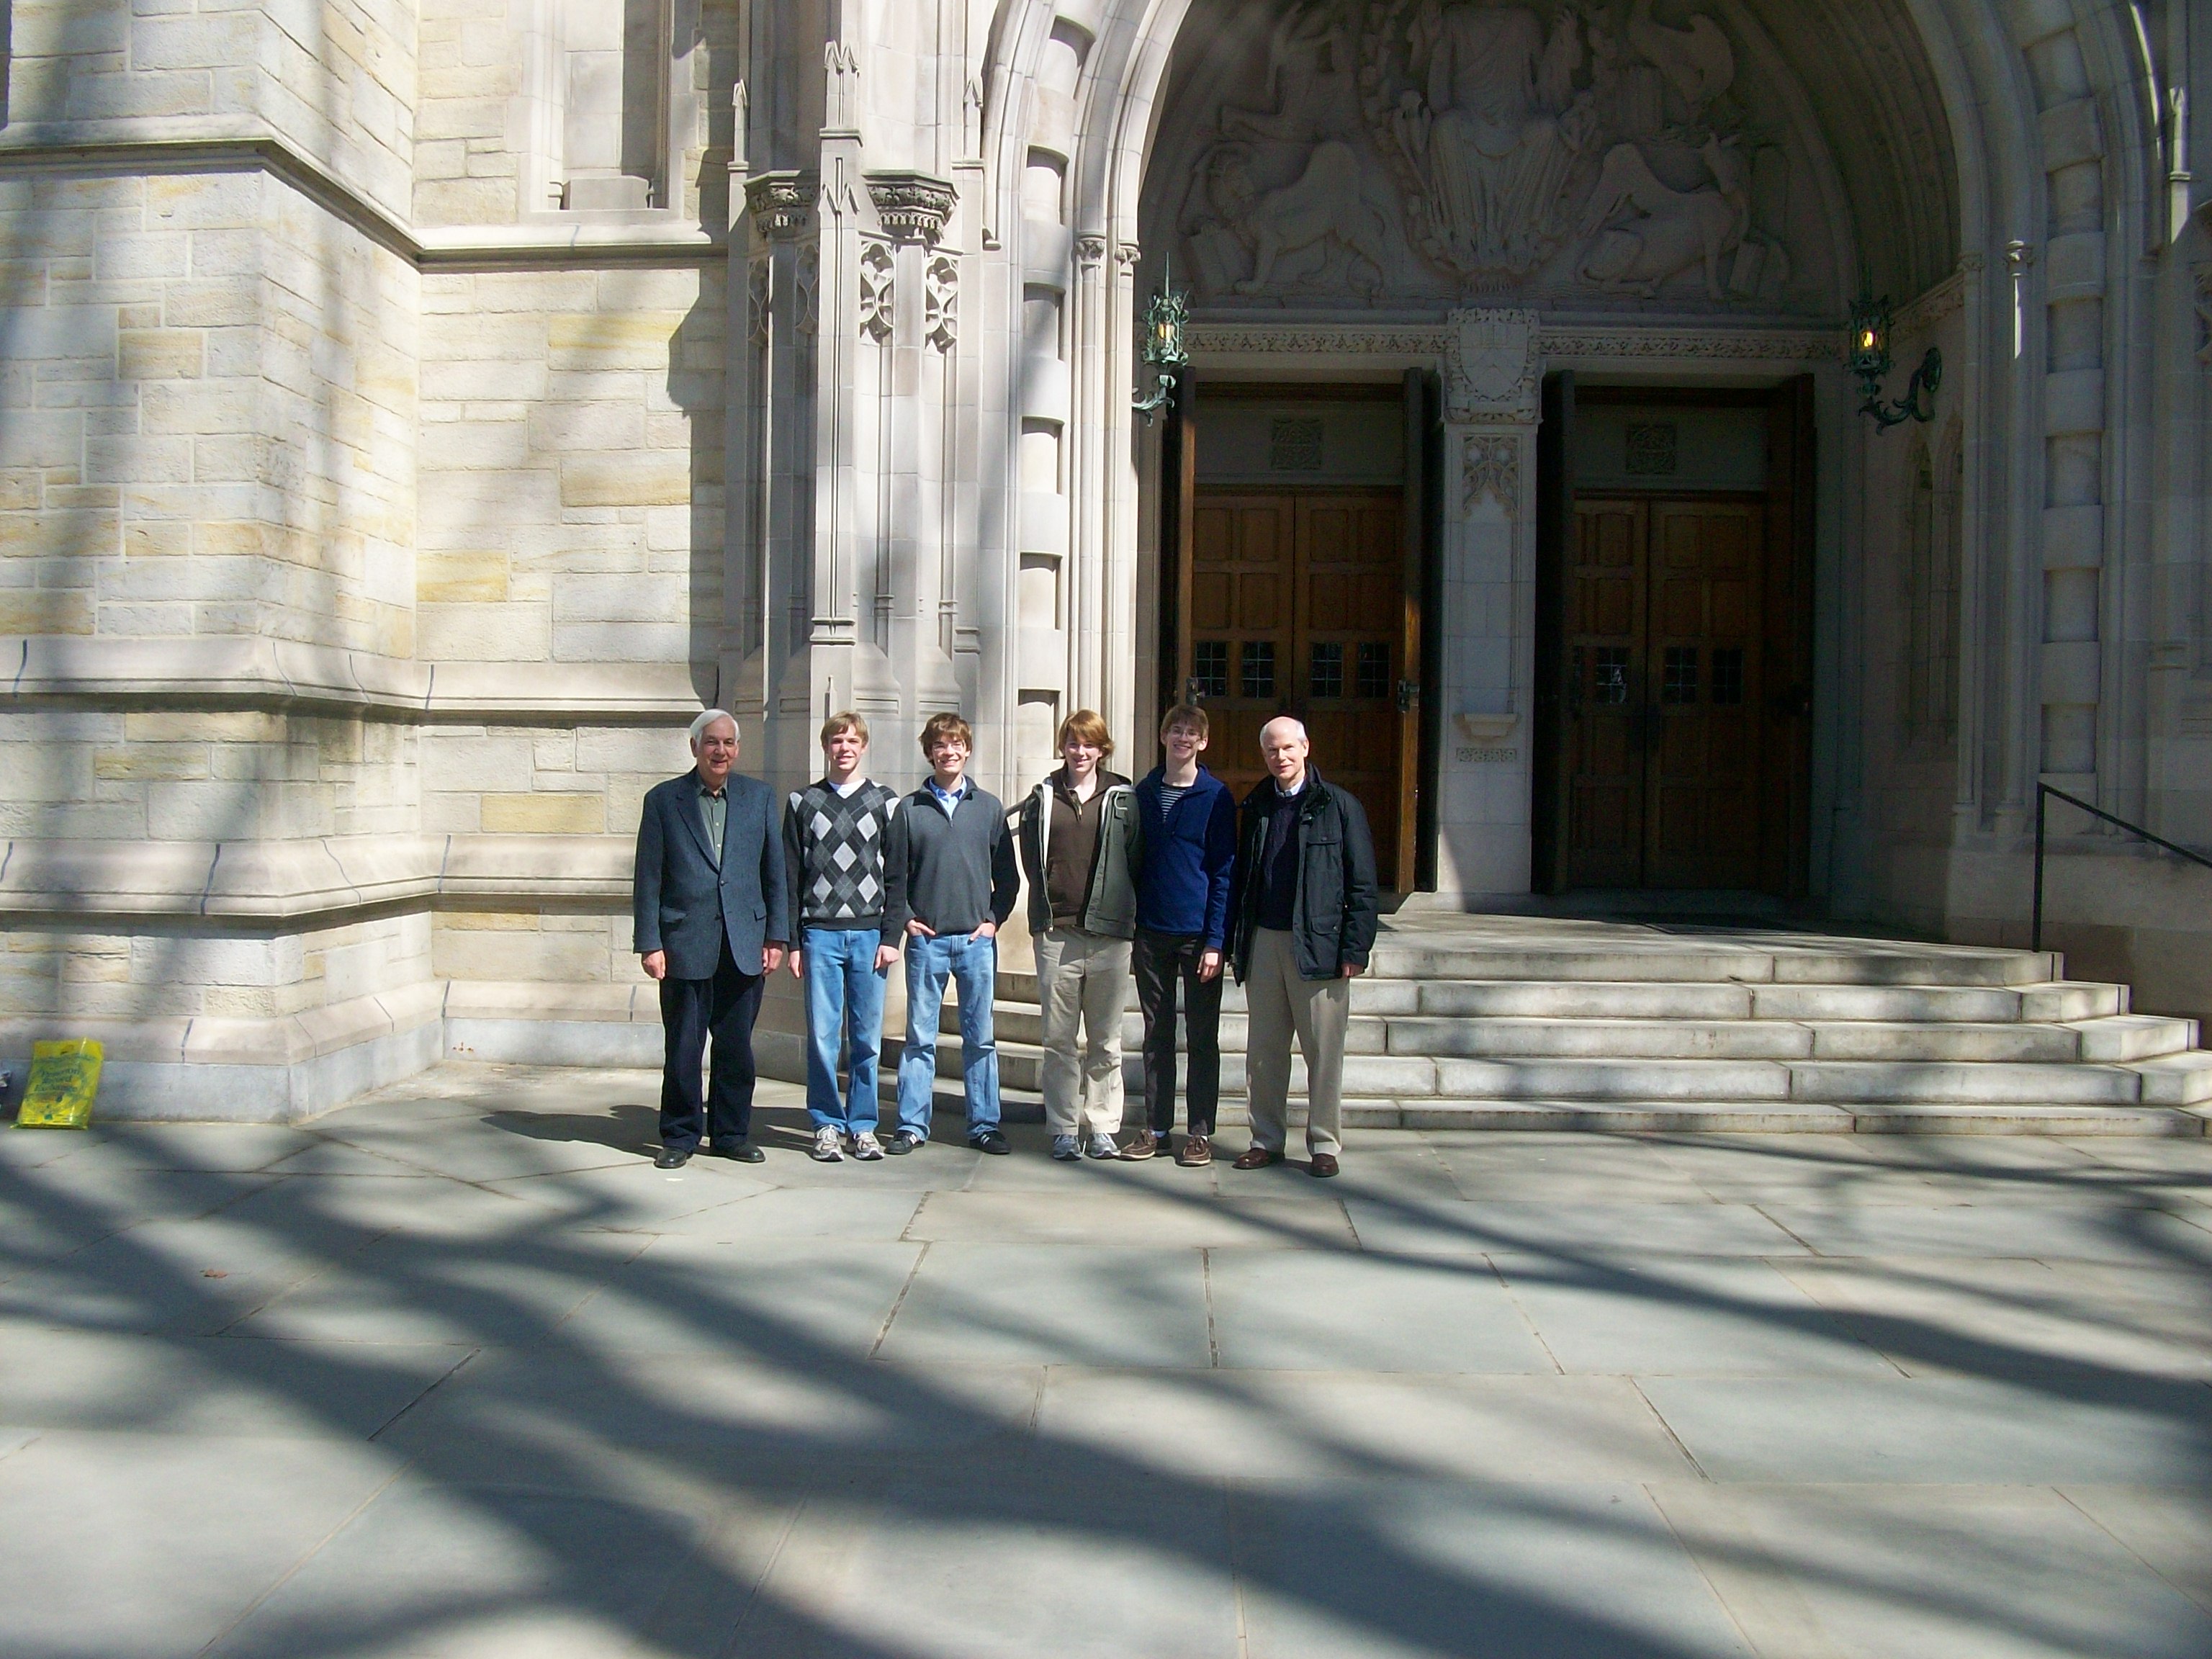 Andrew and other former WNC Choristers with Dr. James Litton (left) at Princeton - Dr. Litton was their first choirmaster at the Cathedral